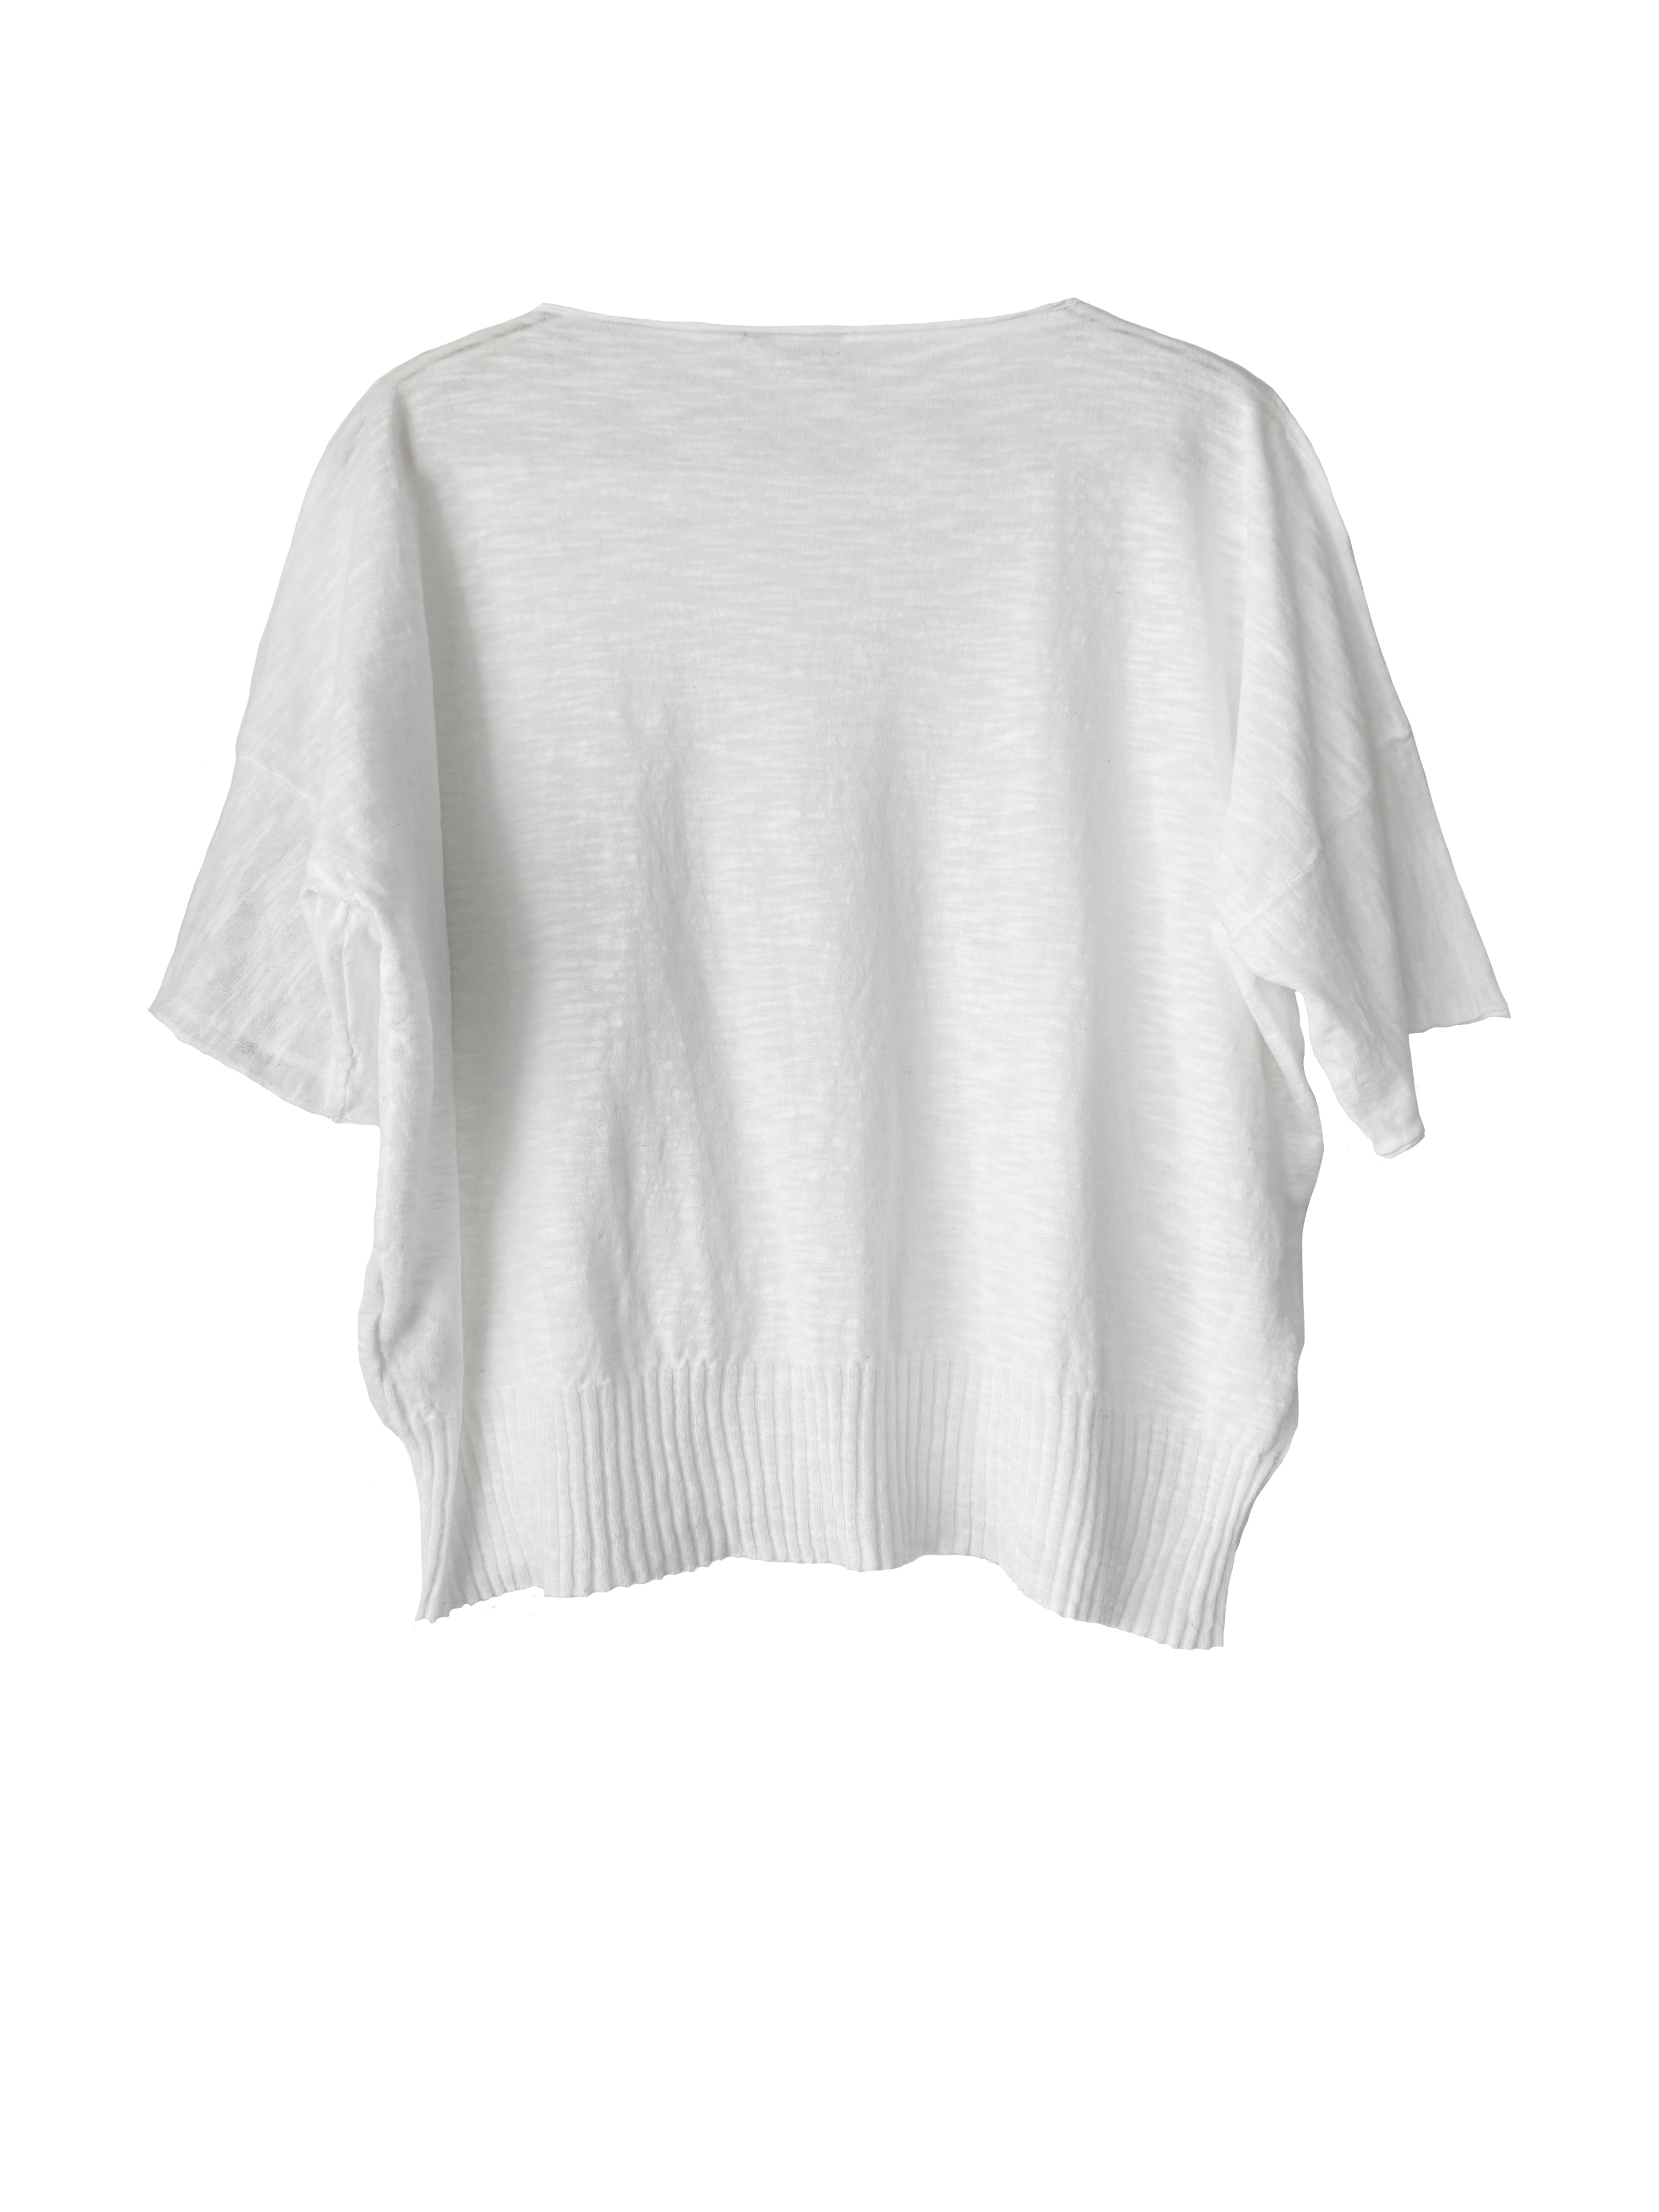 RELAXED TOP WHITE